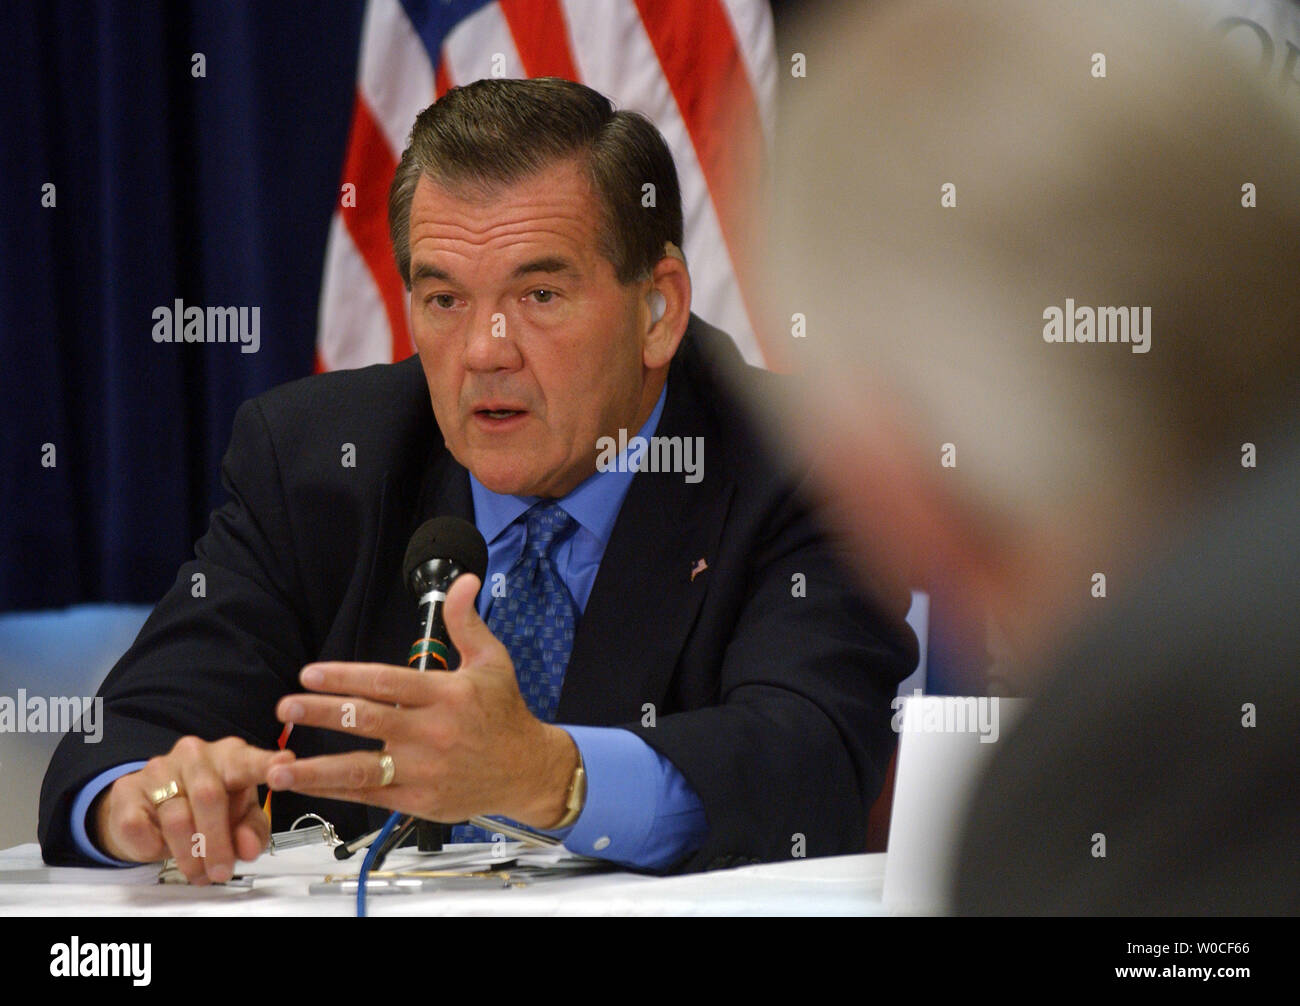 Secretary of Homeland Security Tom Ridge speaks during a meeting of the Homeland Security Advisory Committee (HSAC) at the Coast Guard Headquarters in Washington on Sept. 22, 2004. HSAC, a group of public and private officials, meets regulary to discuss security issues and make recommendations.   (UPI Photo/Roger L. Wollenberg) Stock Photo